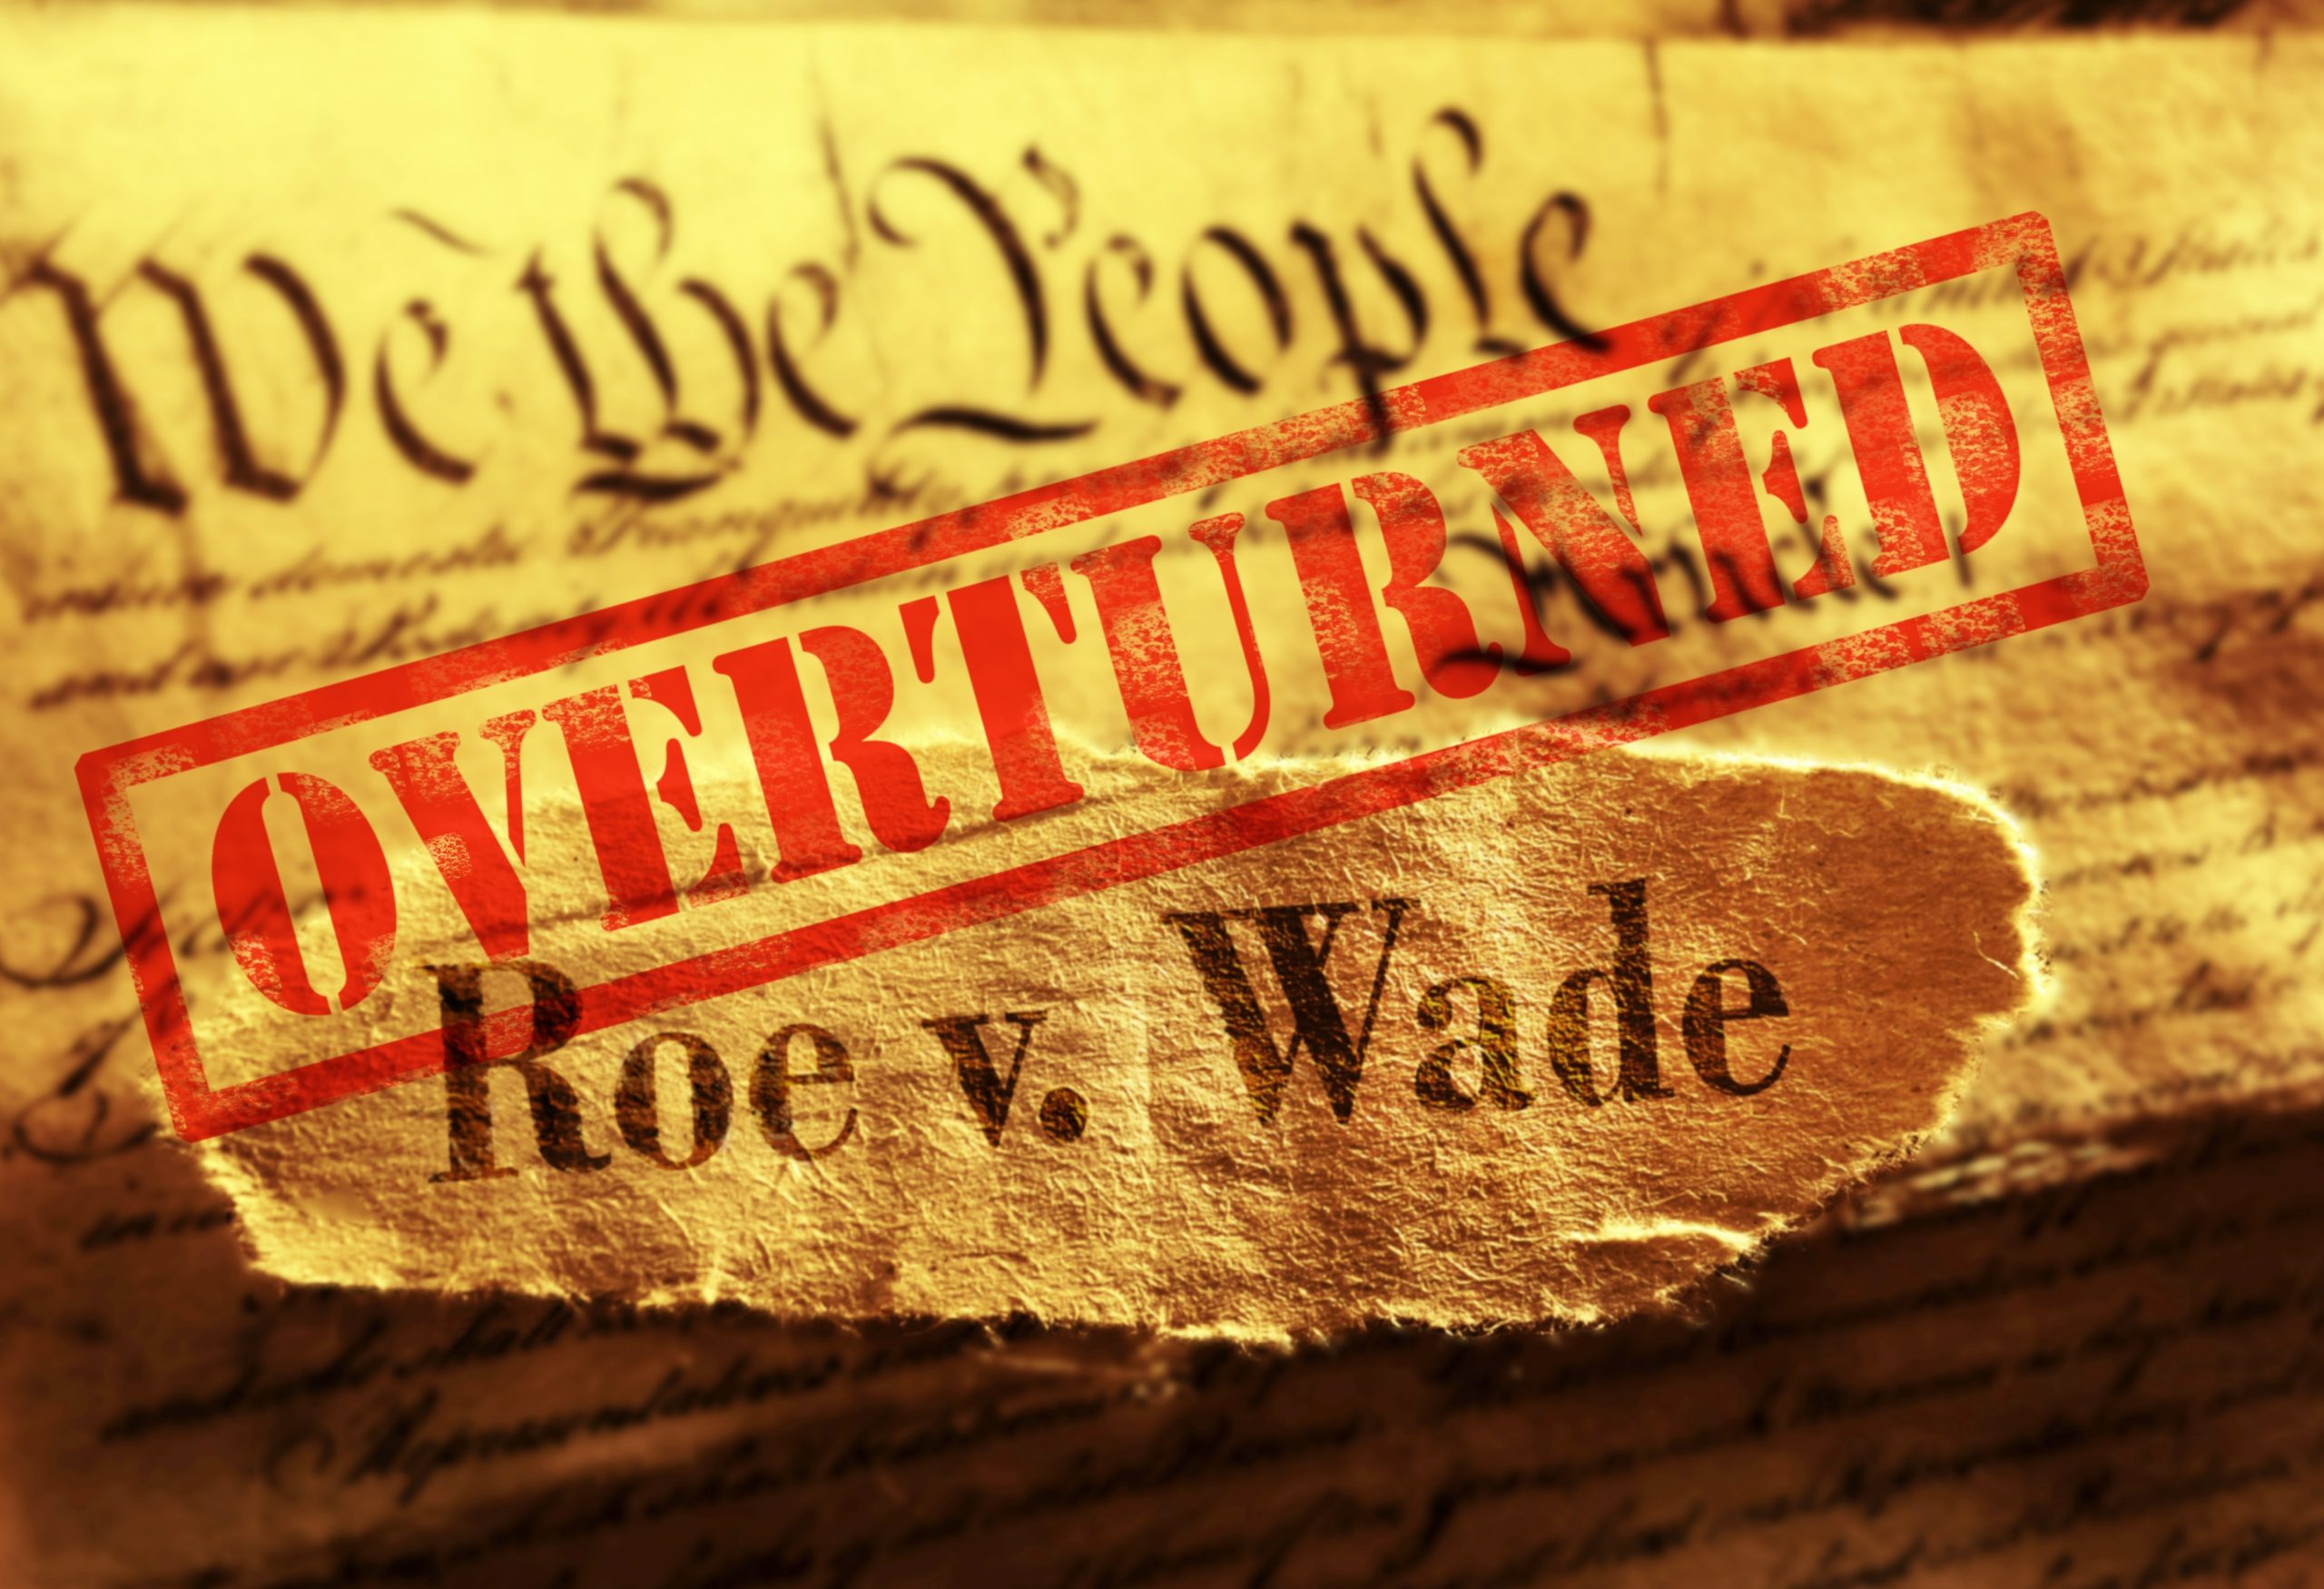 The constitution with the words "Roe v. Wade Overturned" on top of it